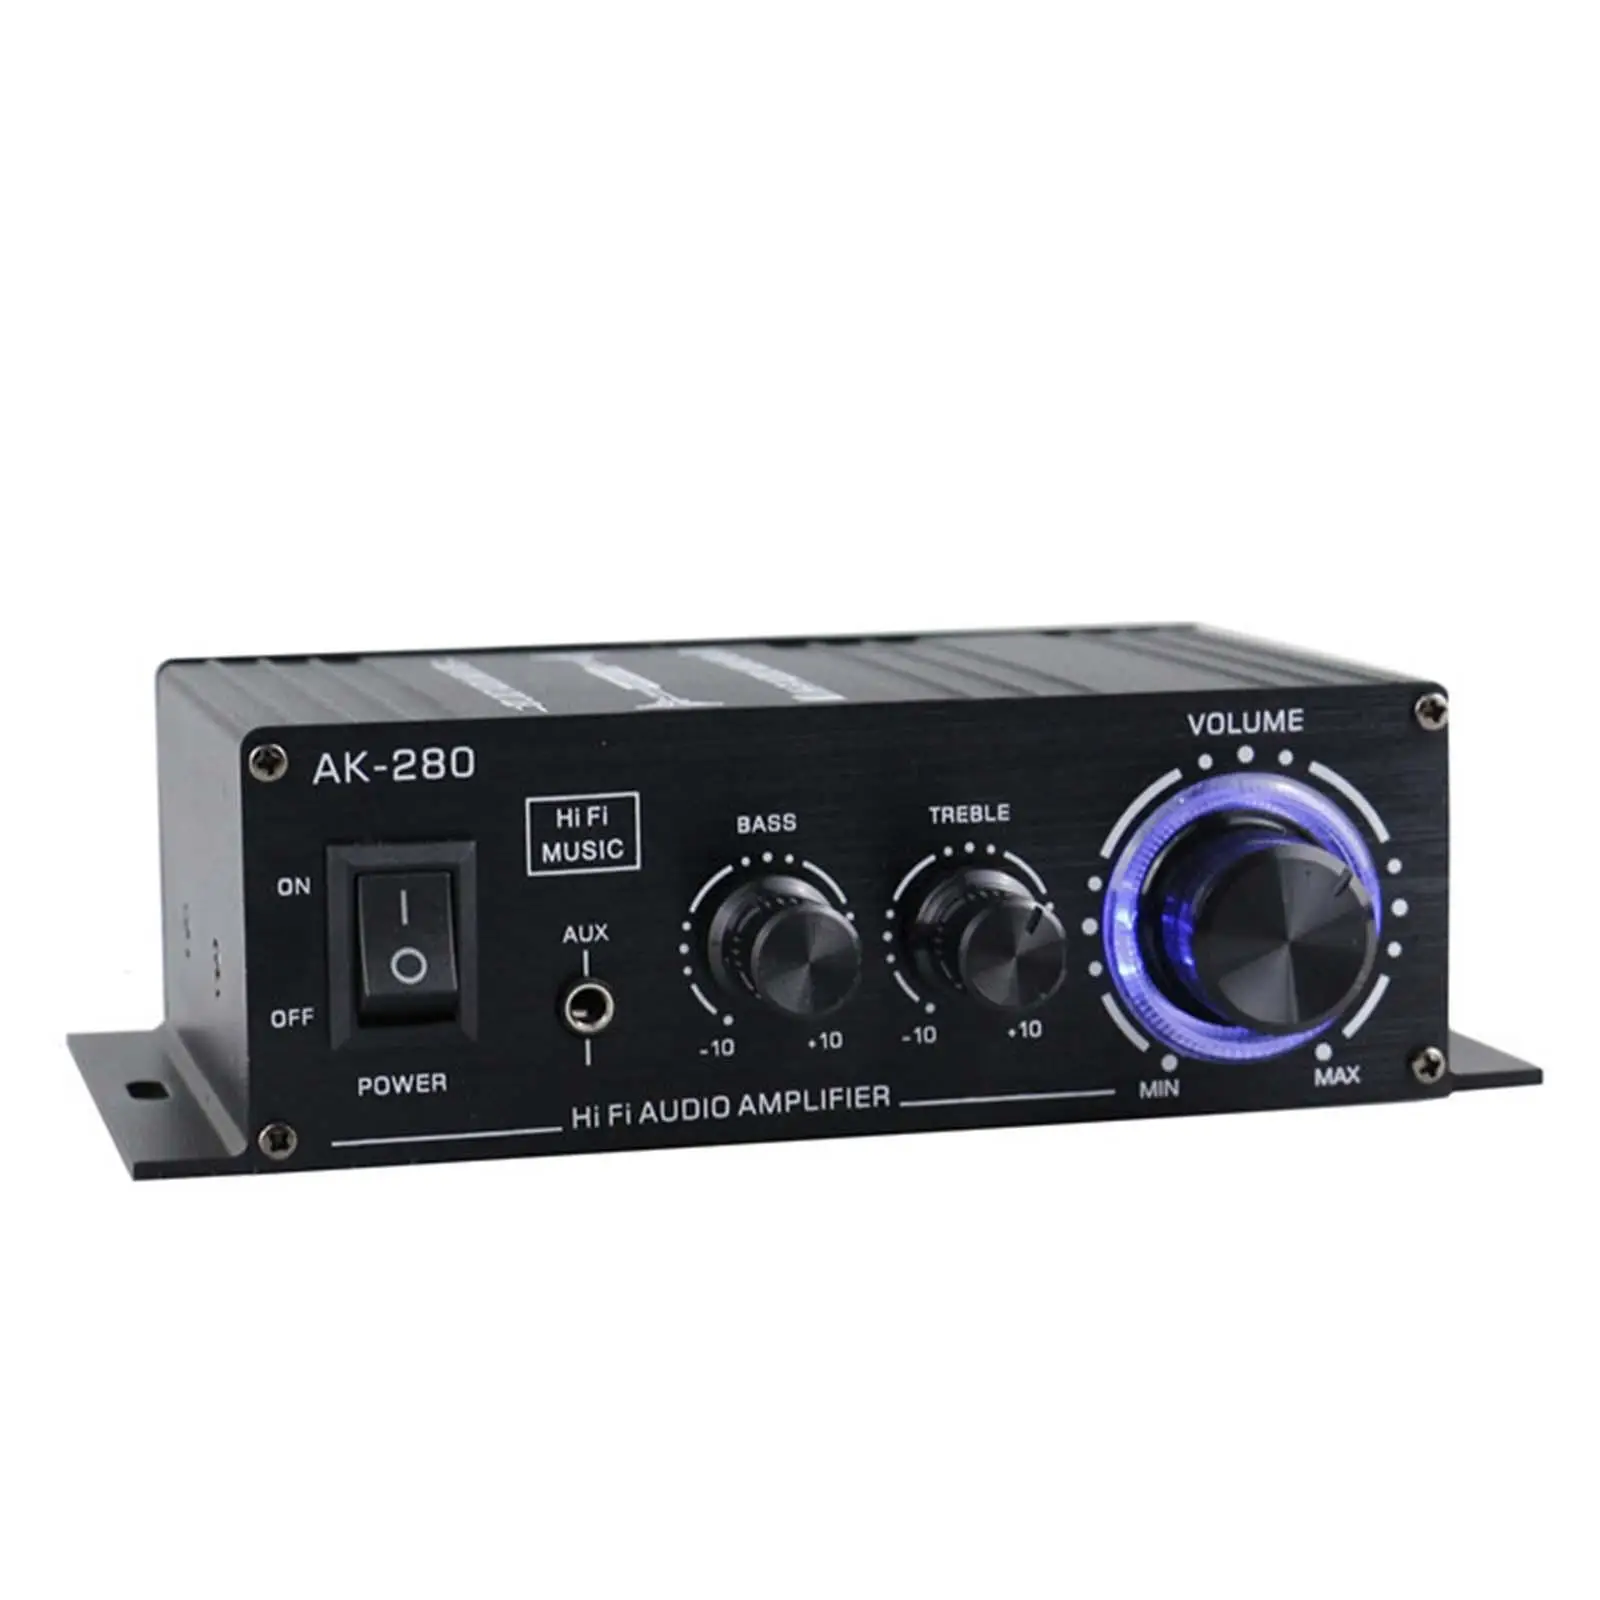 AK-280 Stereo Audio Power Amplifier Dual Channel Bass Treble Volume Adjustment 12V Stereo Receivers for Home Stereo Speakers